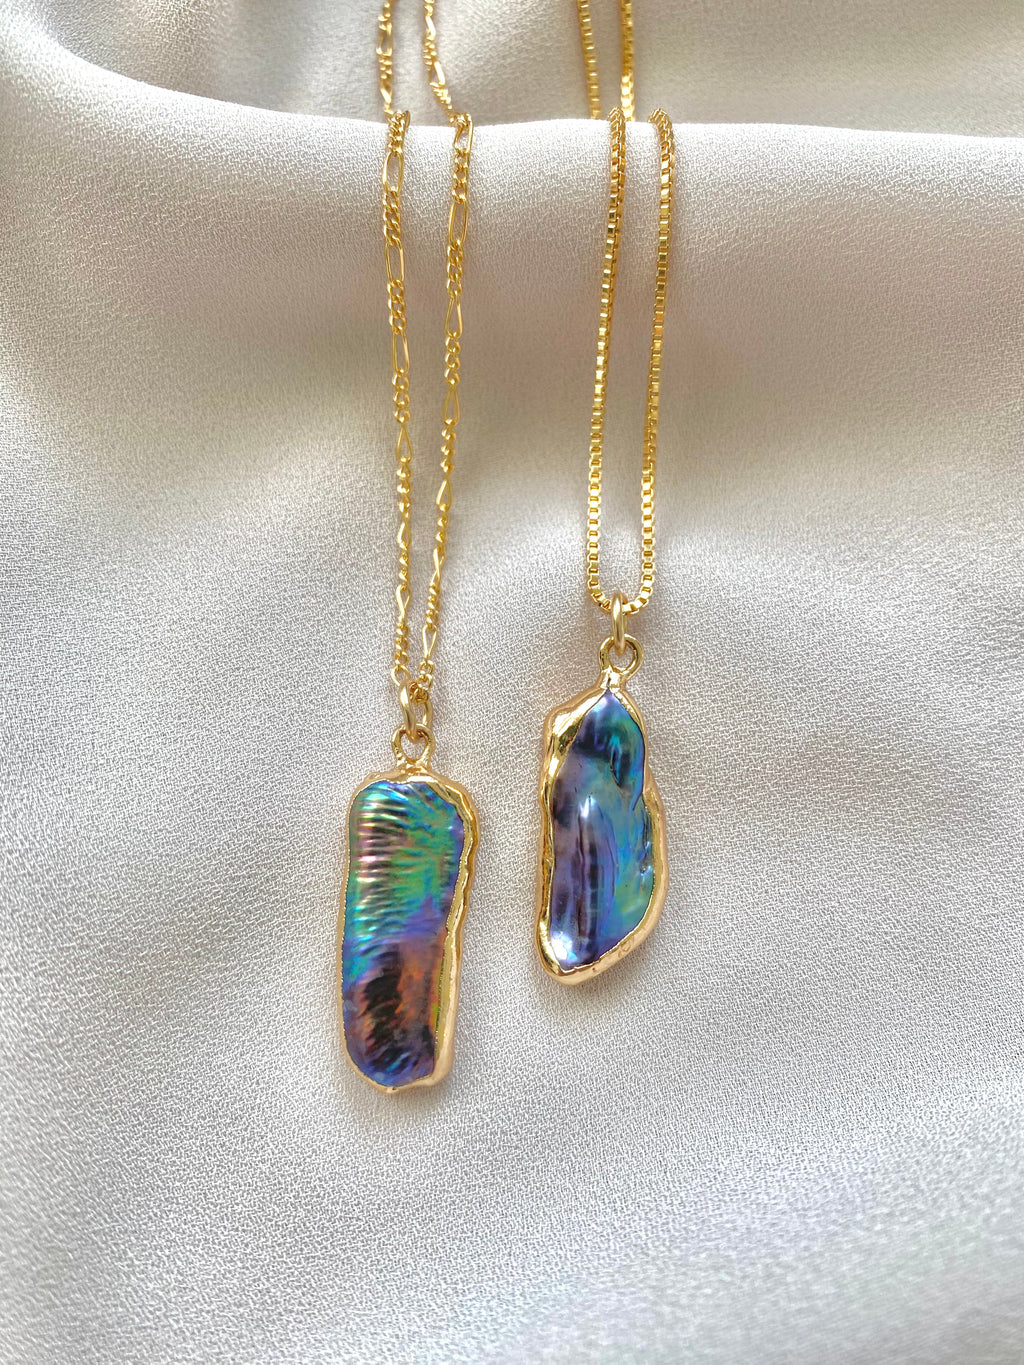 Peacock Pearl Pendant Necklace - June Birthstone Jewelry - Rainbow Pearl - Gold Filled Chains